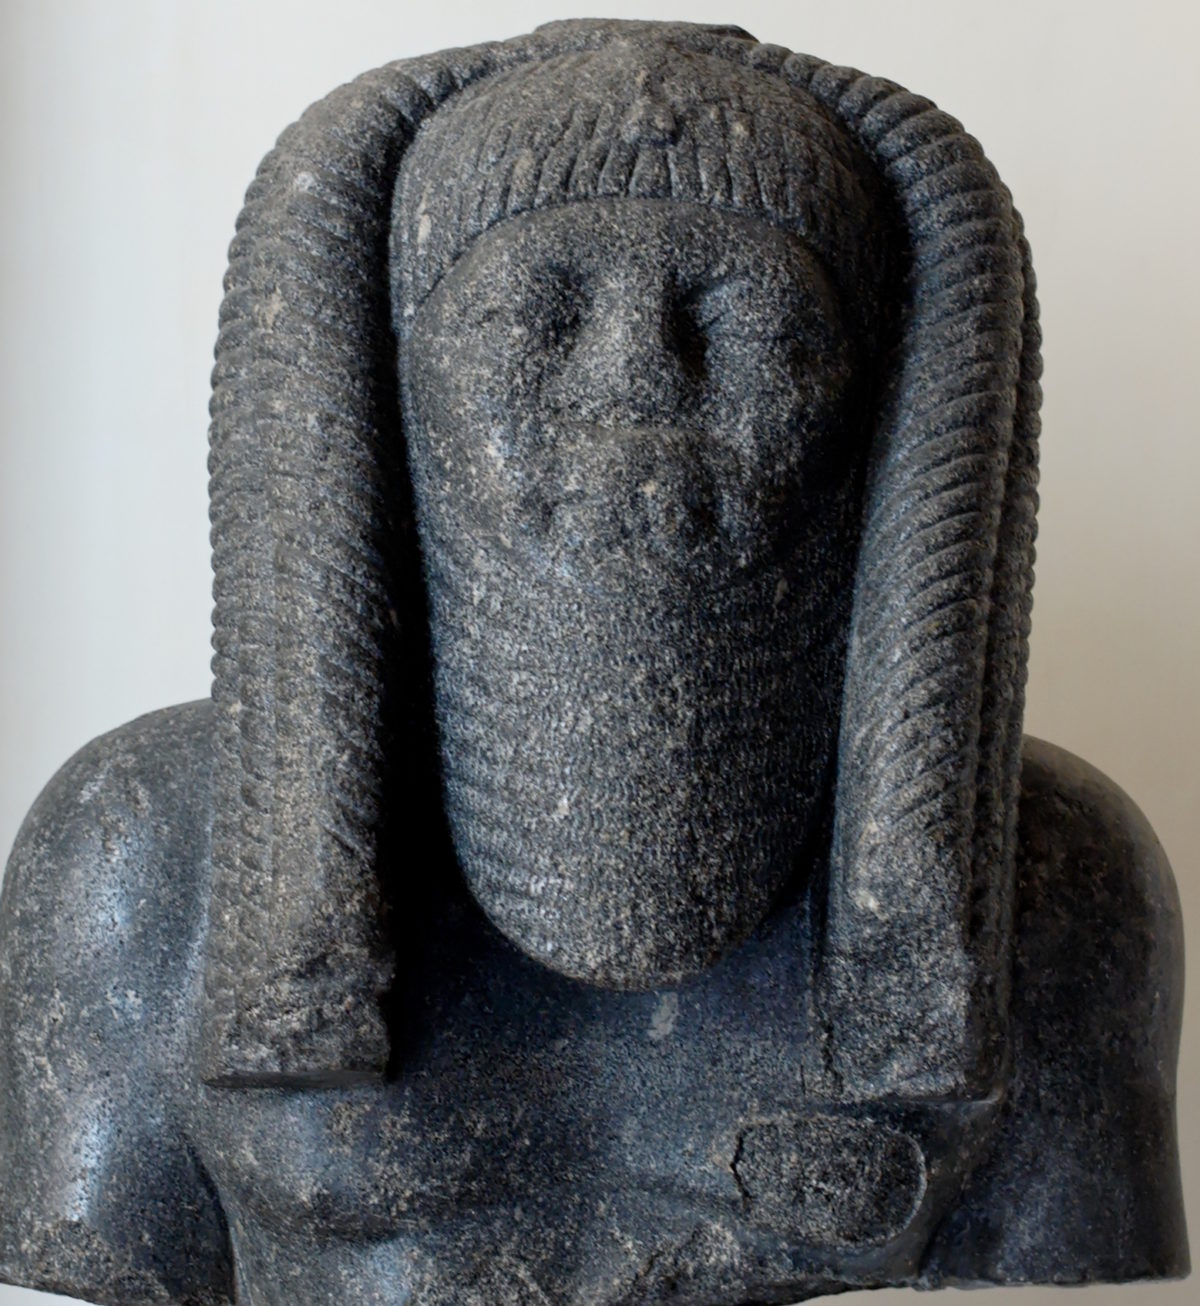 A curious statue of a Kemite King